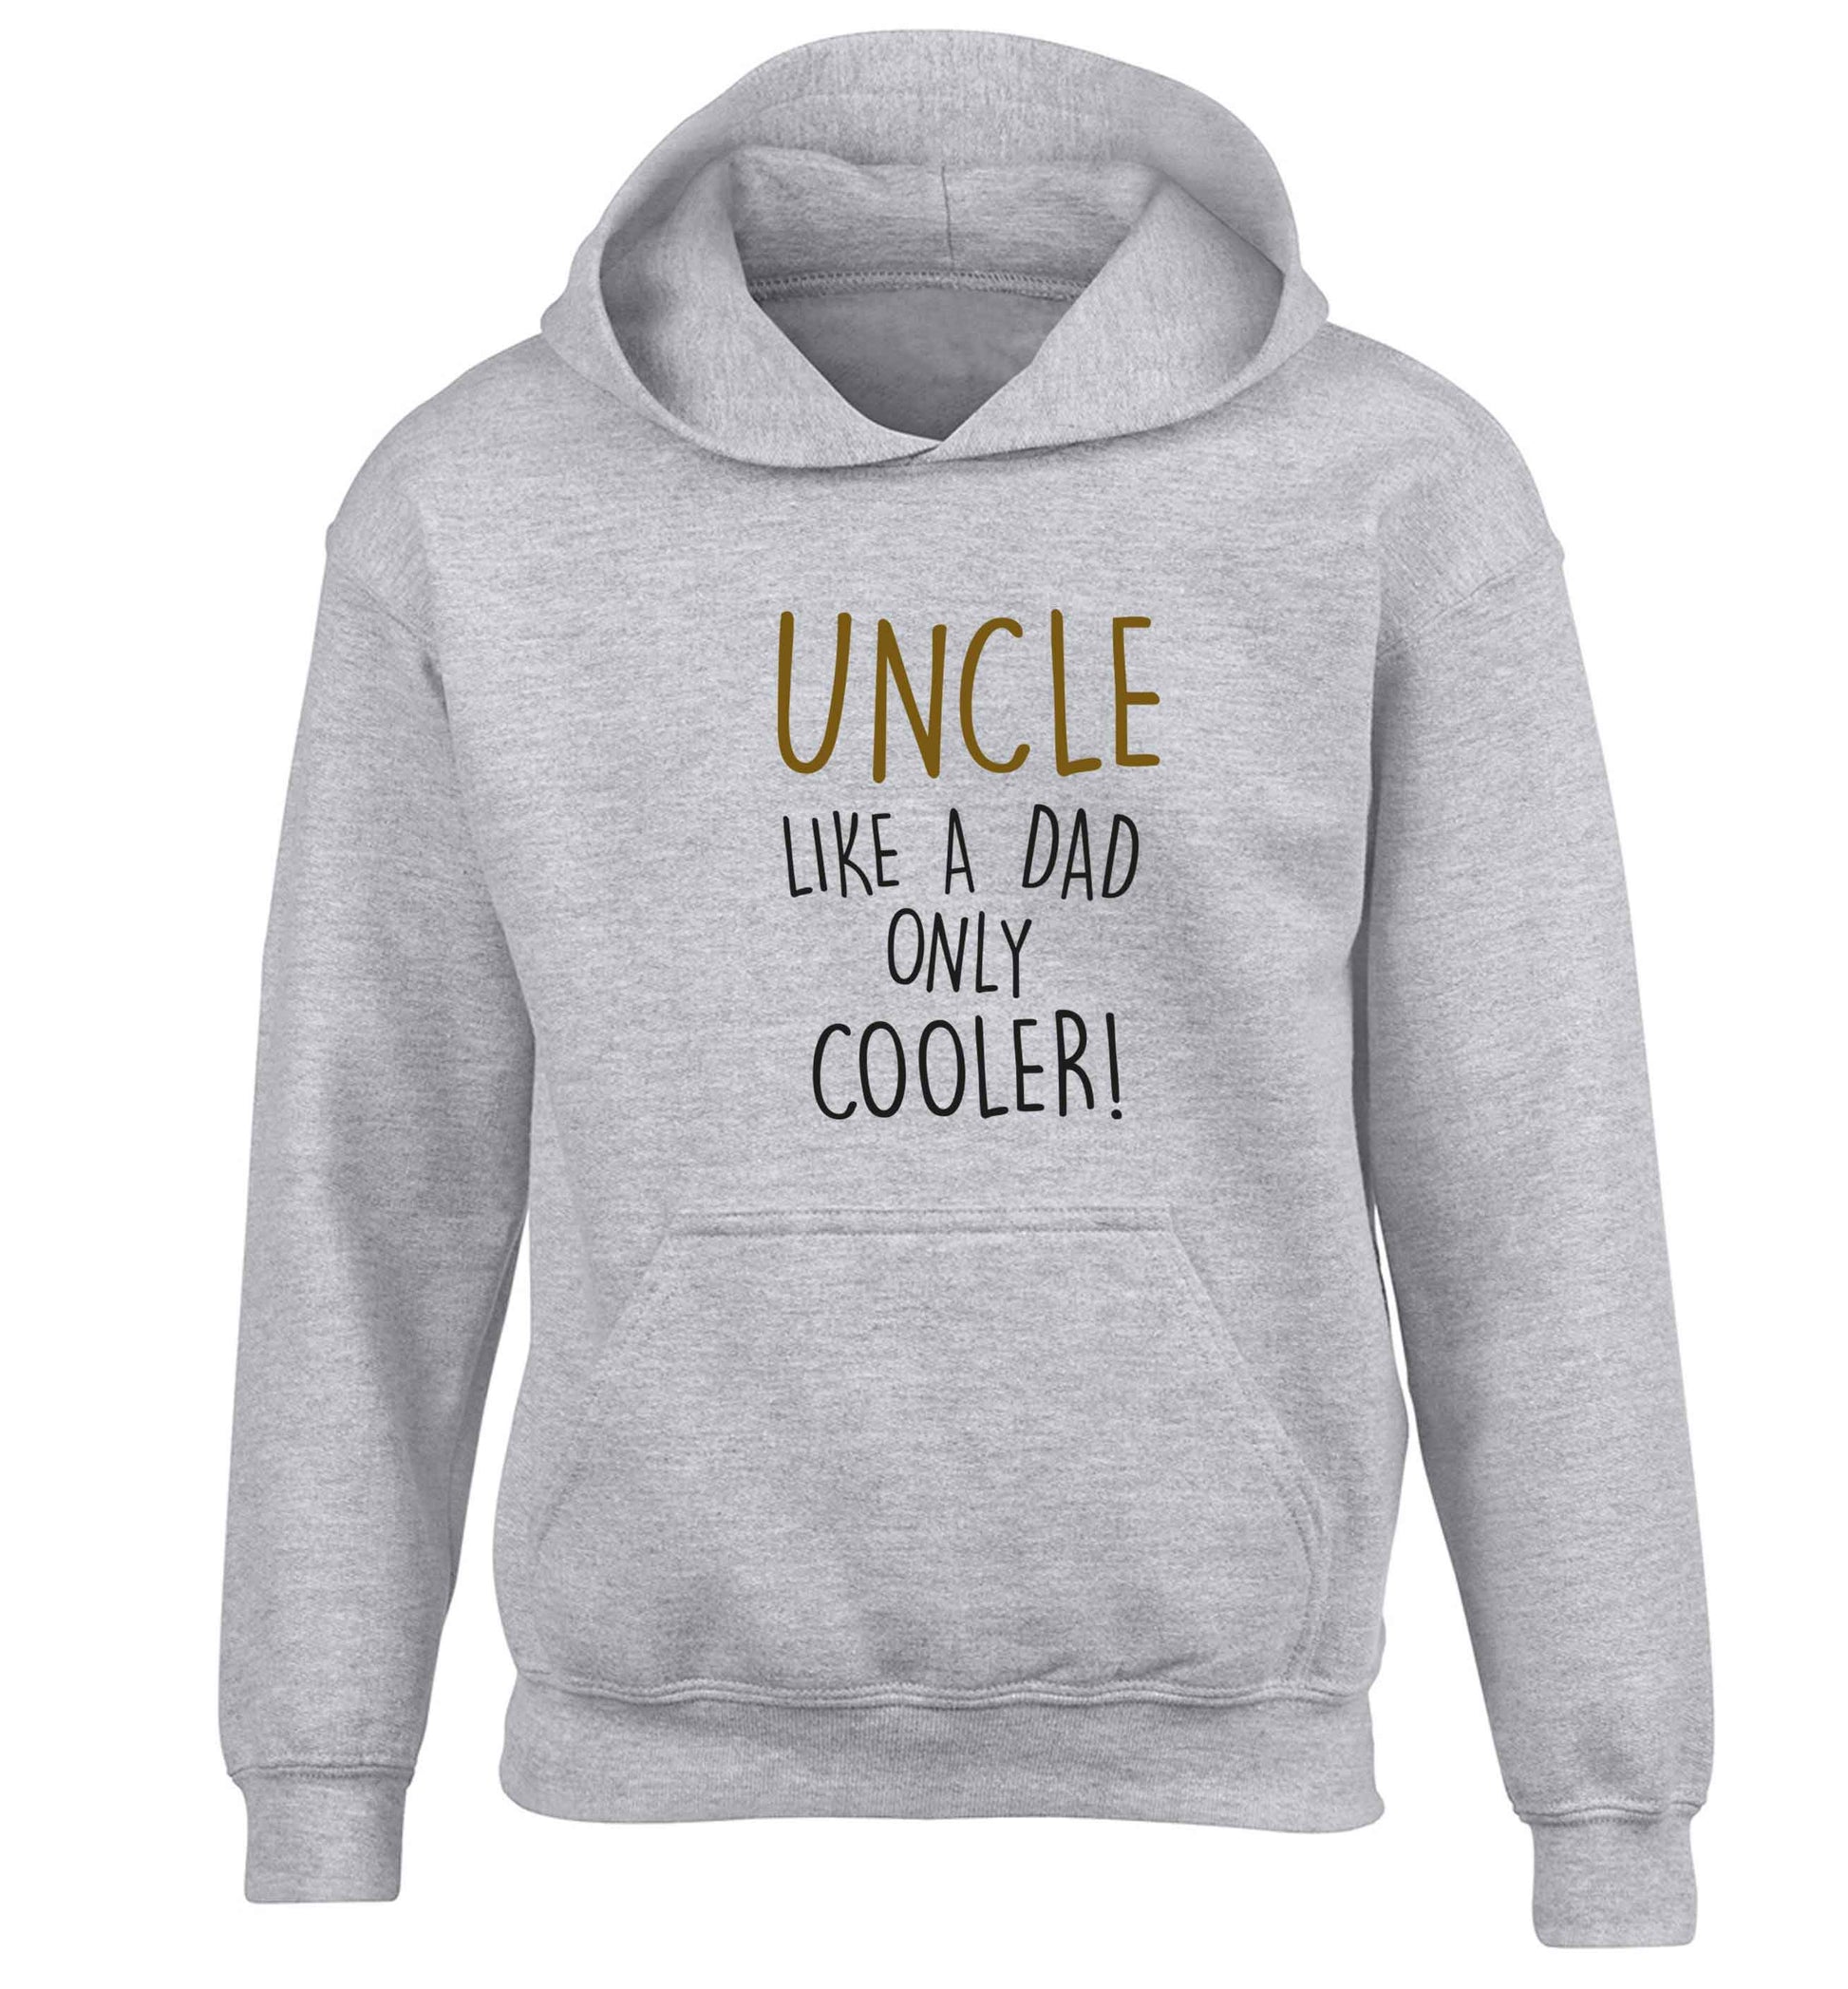 Uncle like a dad only cooler children's grey hoodie 12-13 Years